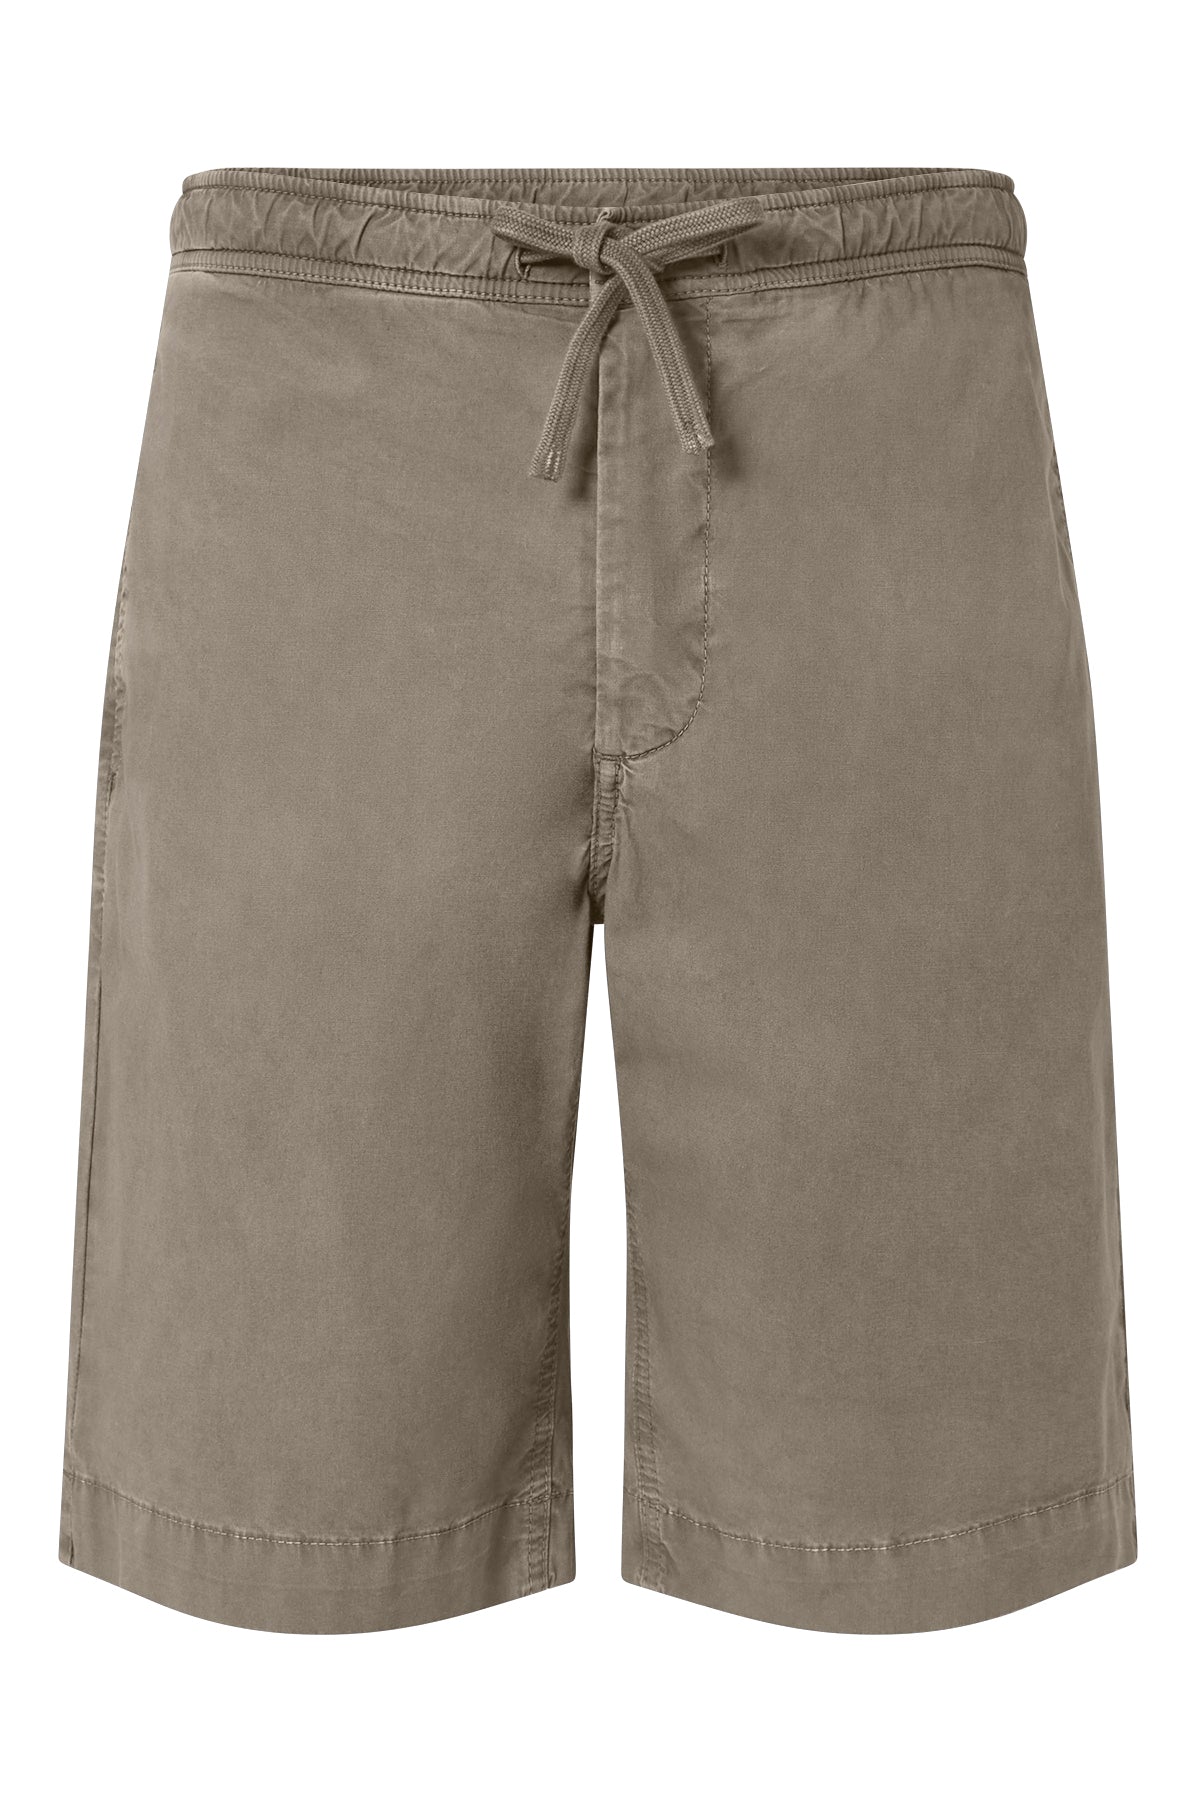 SHORT ETHICA TAUPE